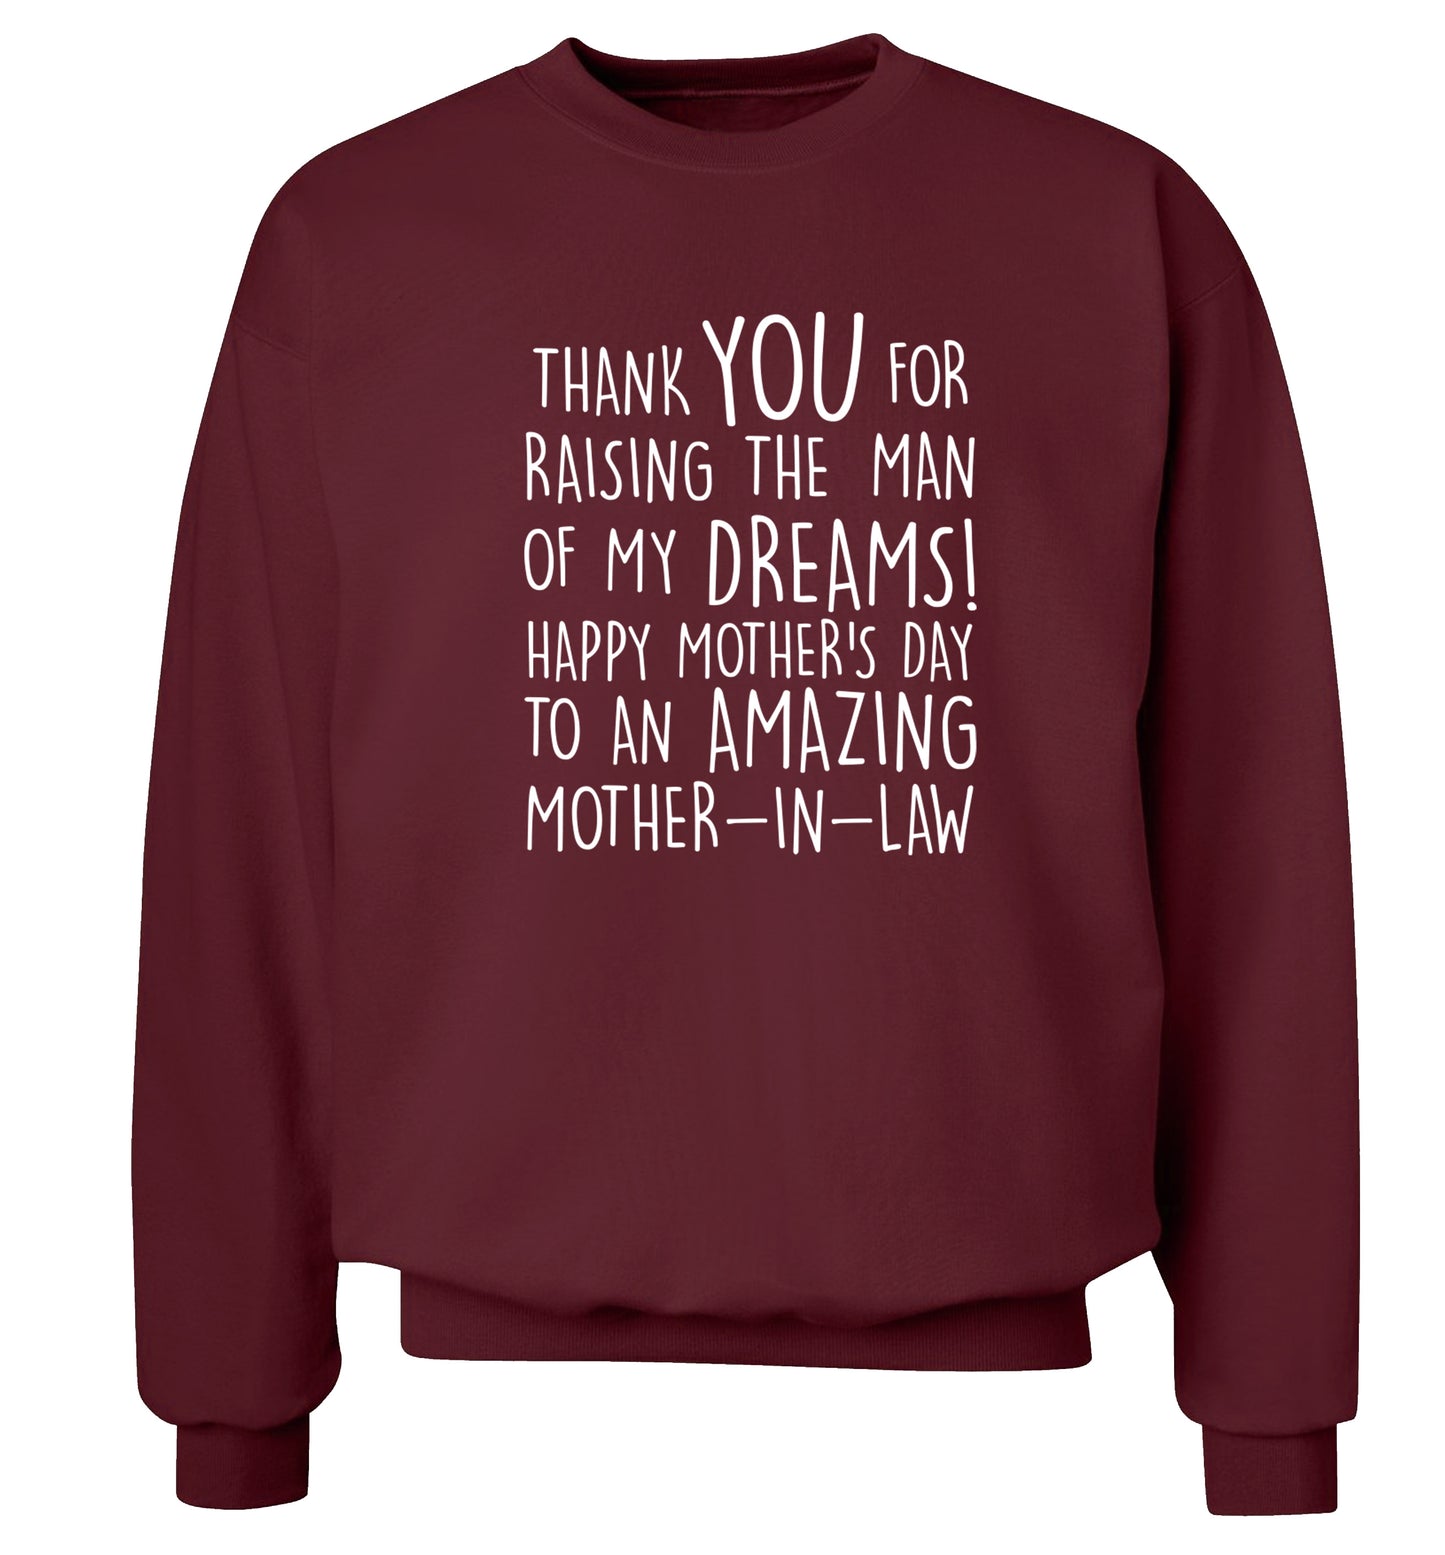 Thank you for raising the man of my dreams happy mother's day mother-in-law Adult's unisex maroon Sweater 2XL